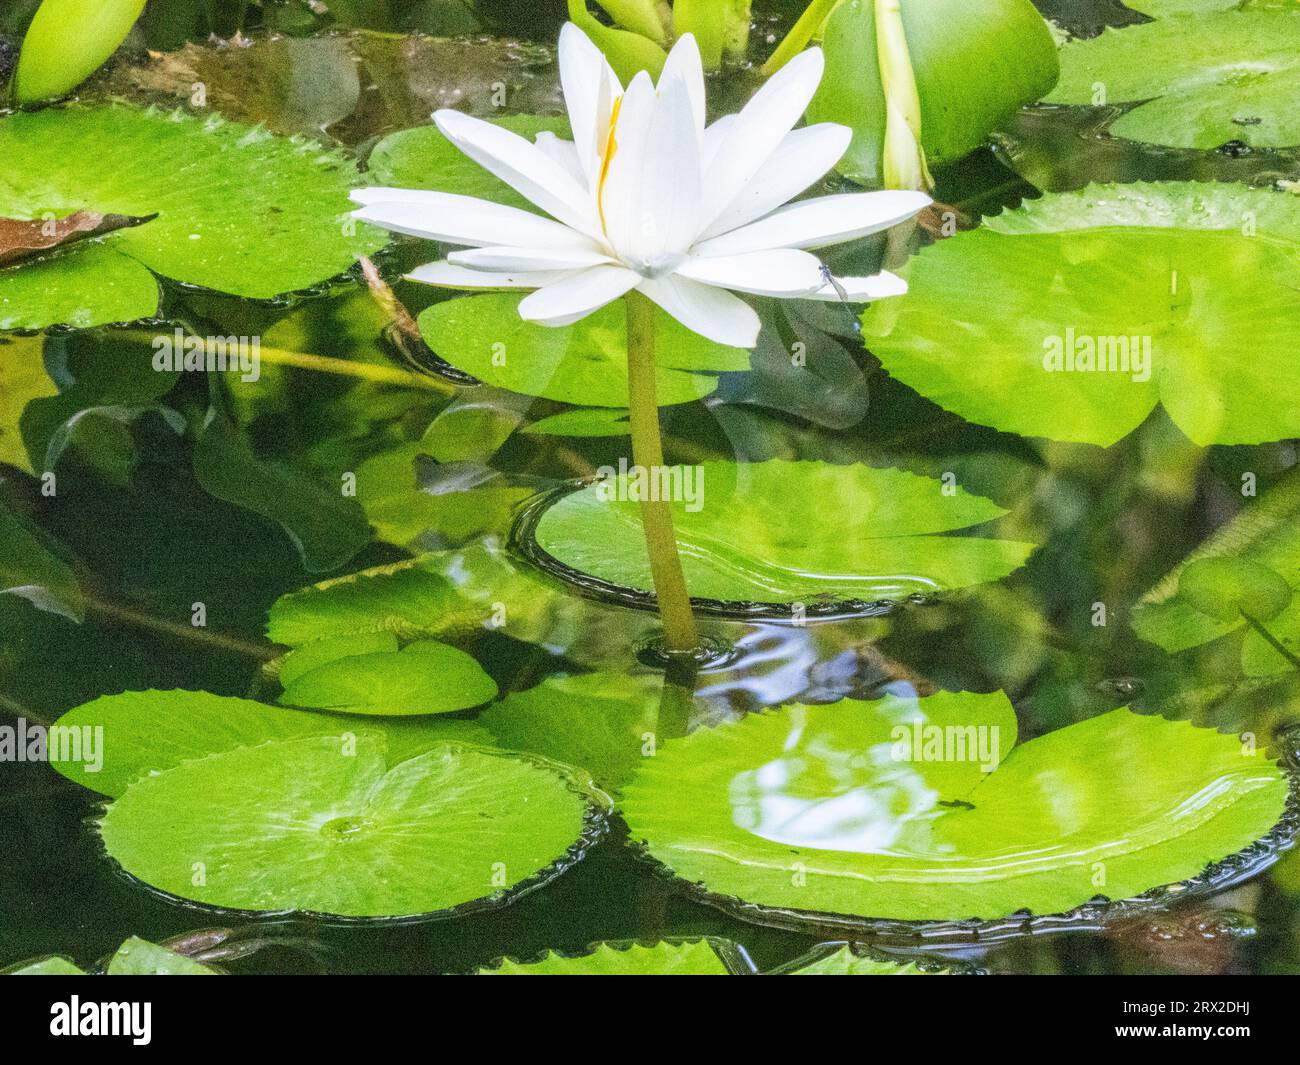 An Egyptian white water-lily (Nymphaea lotus) growing in the rainforest at Playa Blanca, Costa Rica, Central America Stock Photo